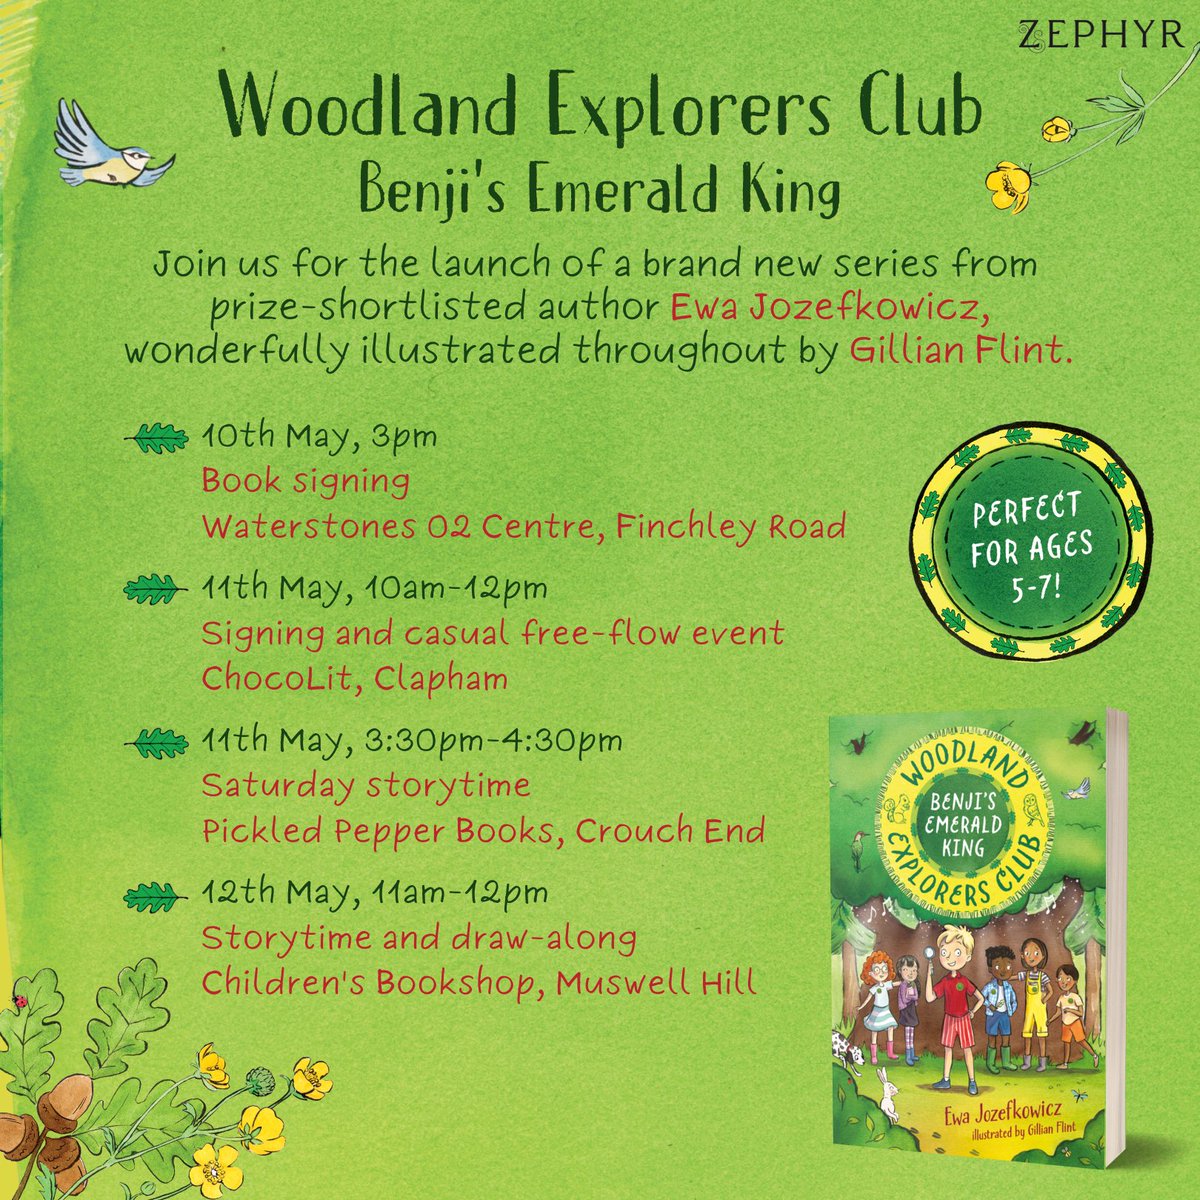 This May we have some VERY exciting events lined up with @EwaJozefkowicz!

Check out the events below and come along for an evening of fun, signings and celebrating the #WoodlandExplorersClub and #BenjisEmeraldKing 👇